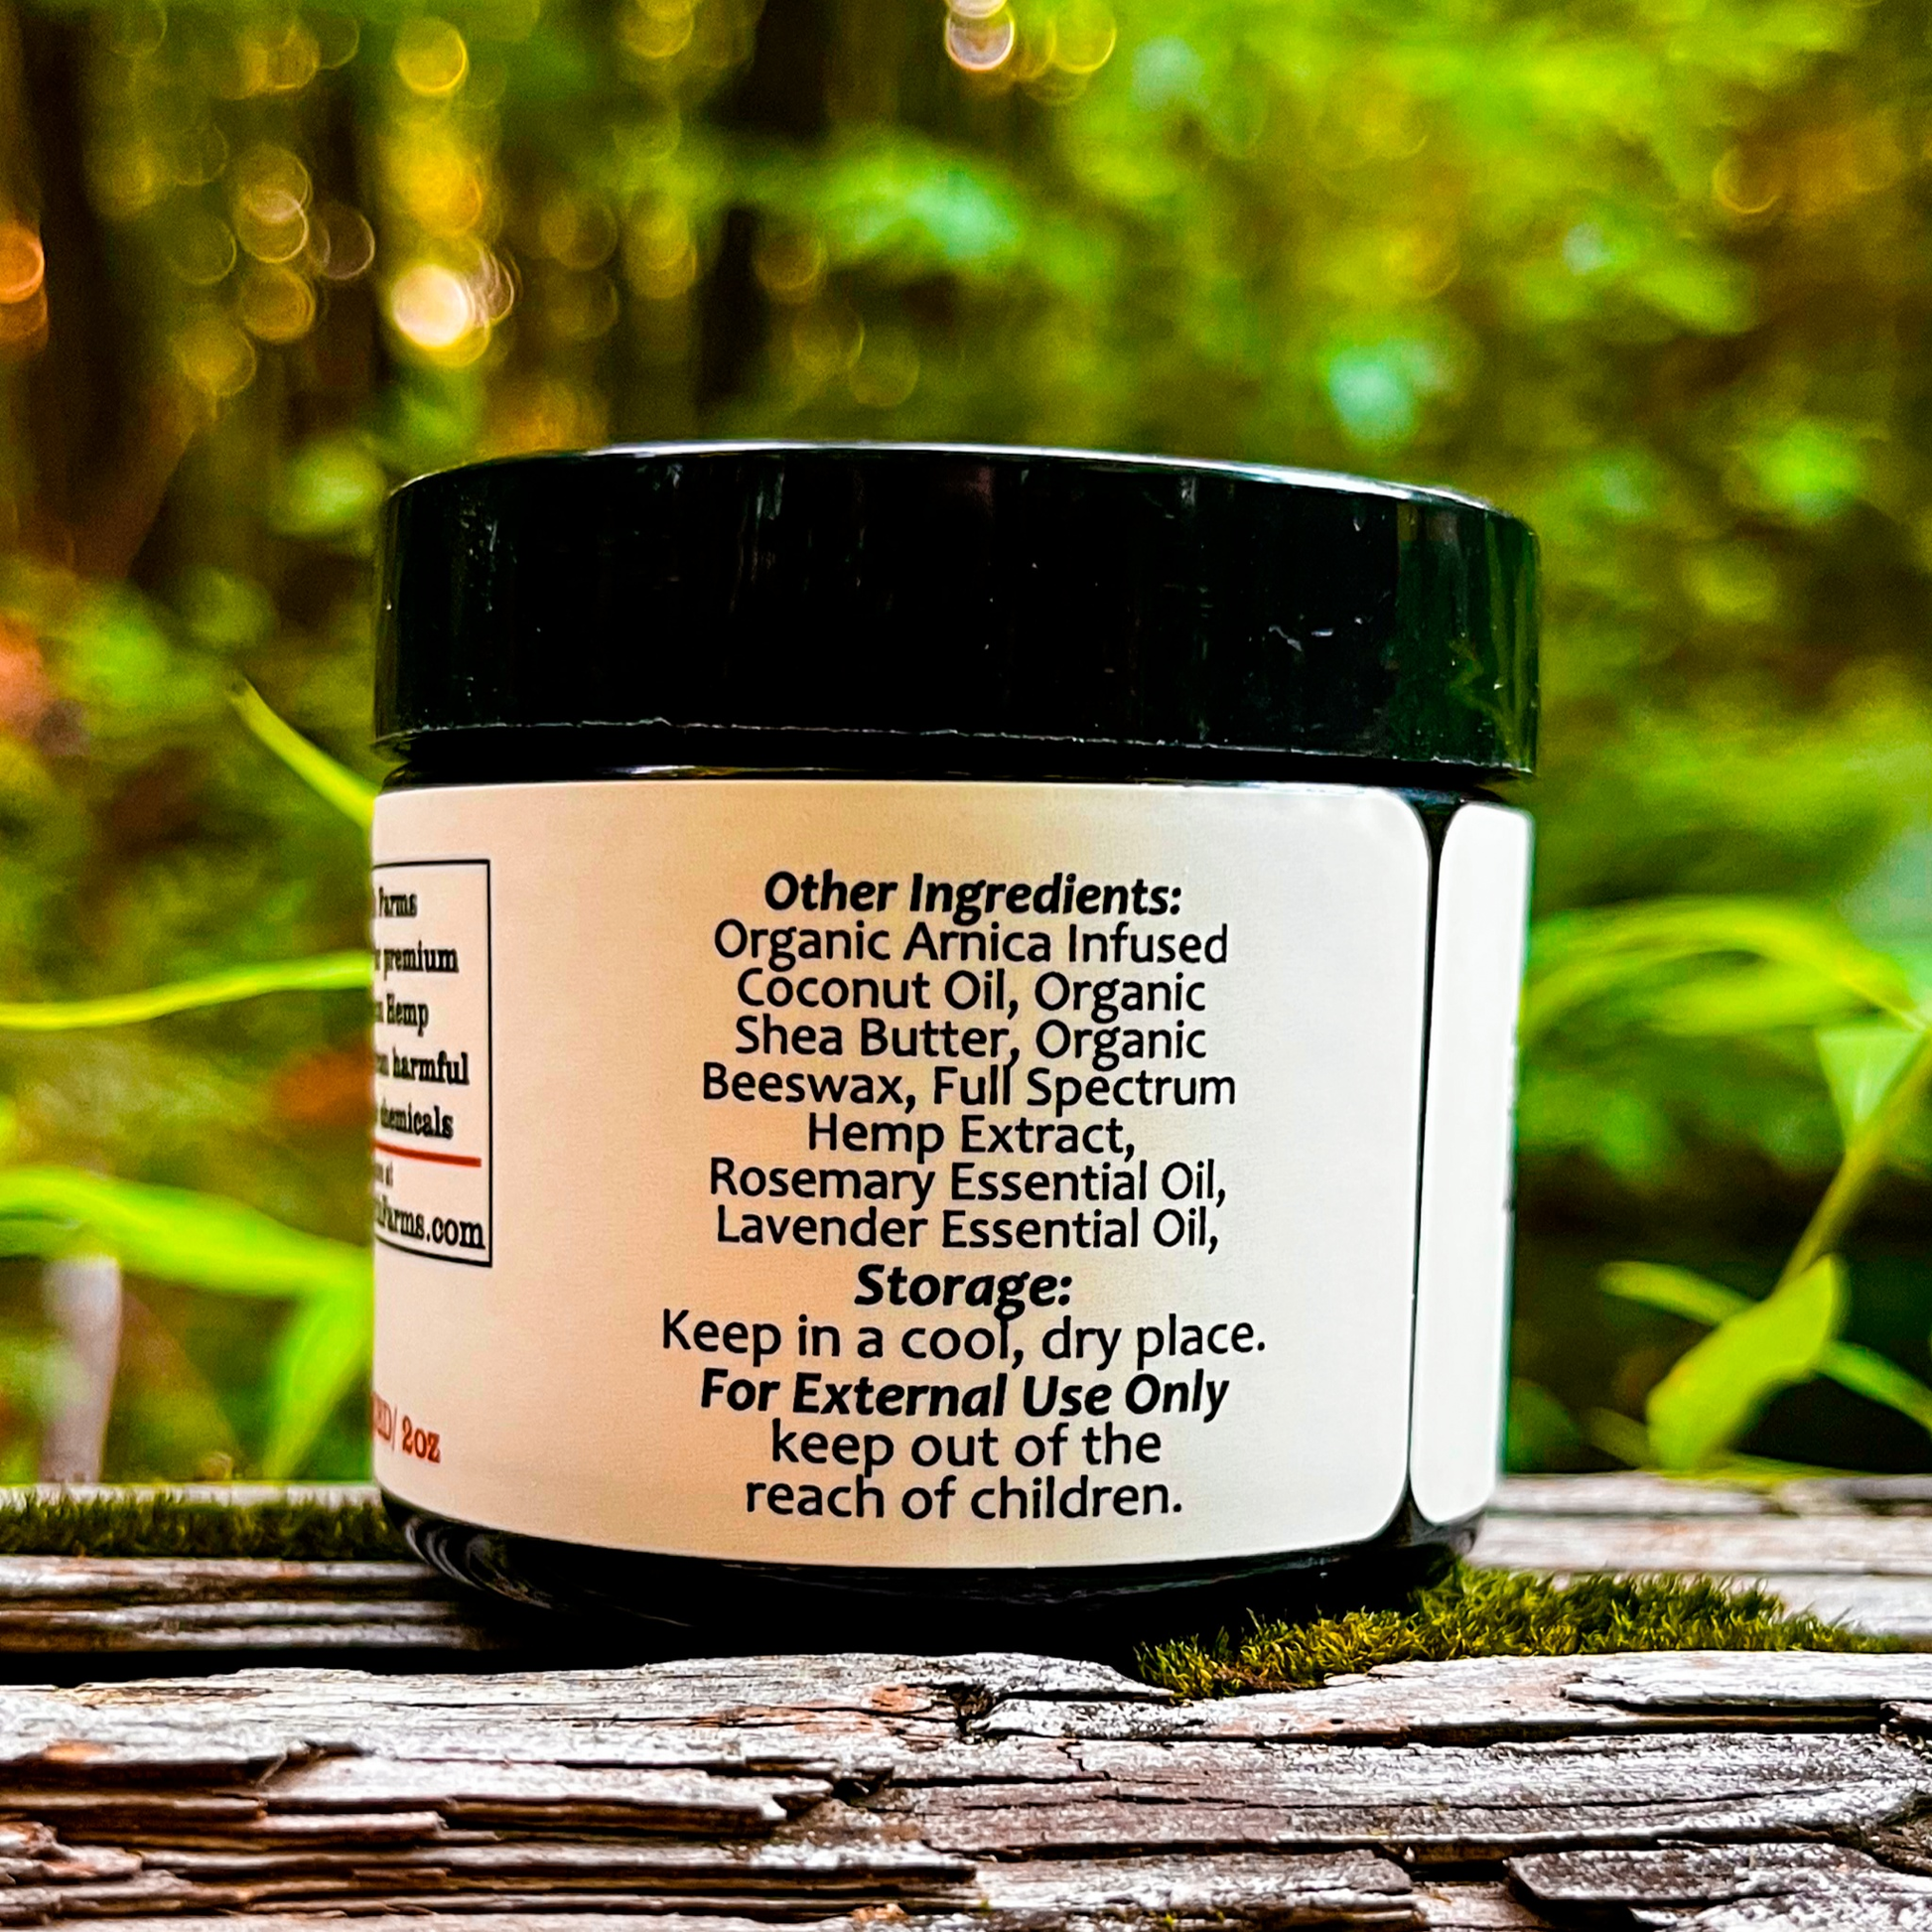 An image of a small jar labeled Dark Earth Farms Full Spectrum Hemp Topical, featuring a green and yellow label with the brand name and product information. The jar contains 2000mg of CBD cream with terpenes and cannabinoids, designed for targeted relief from pain and inflammation. The jar is placed on a wooden surface, surrounded by hemp leaves, and the cream is shown oozing out of the jar, ready for application.